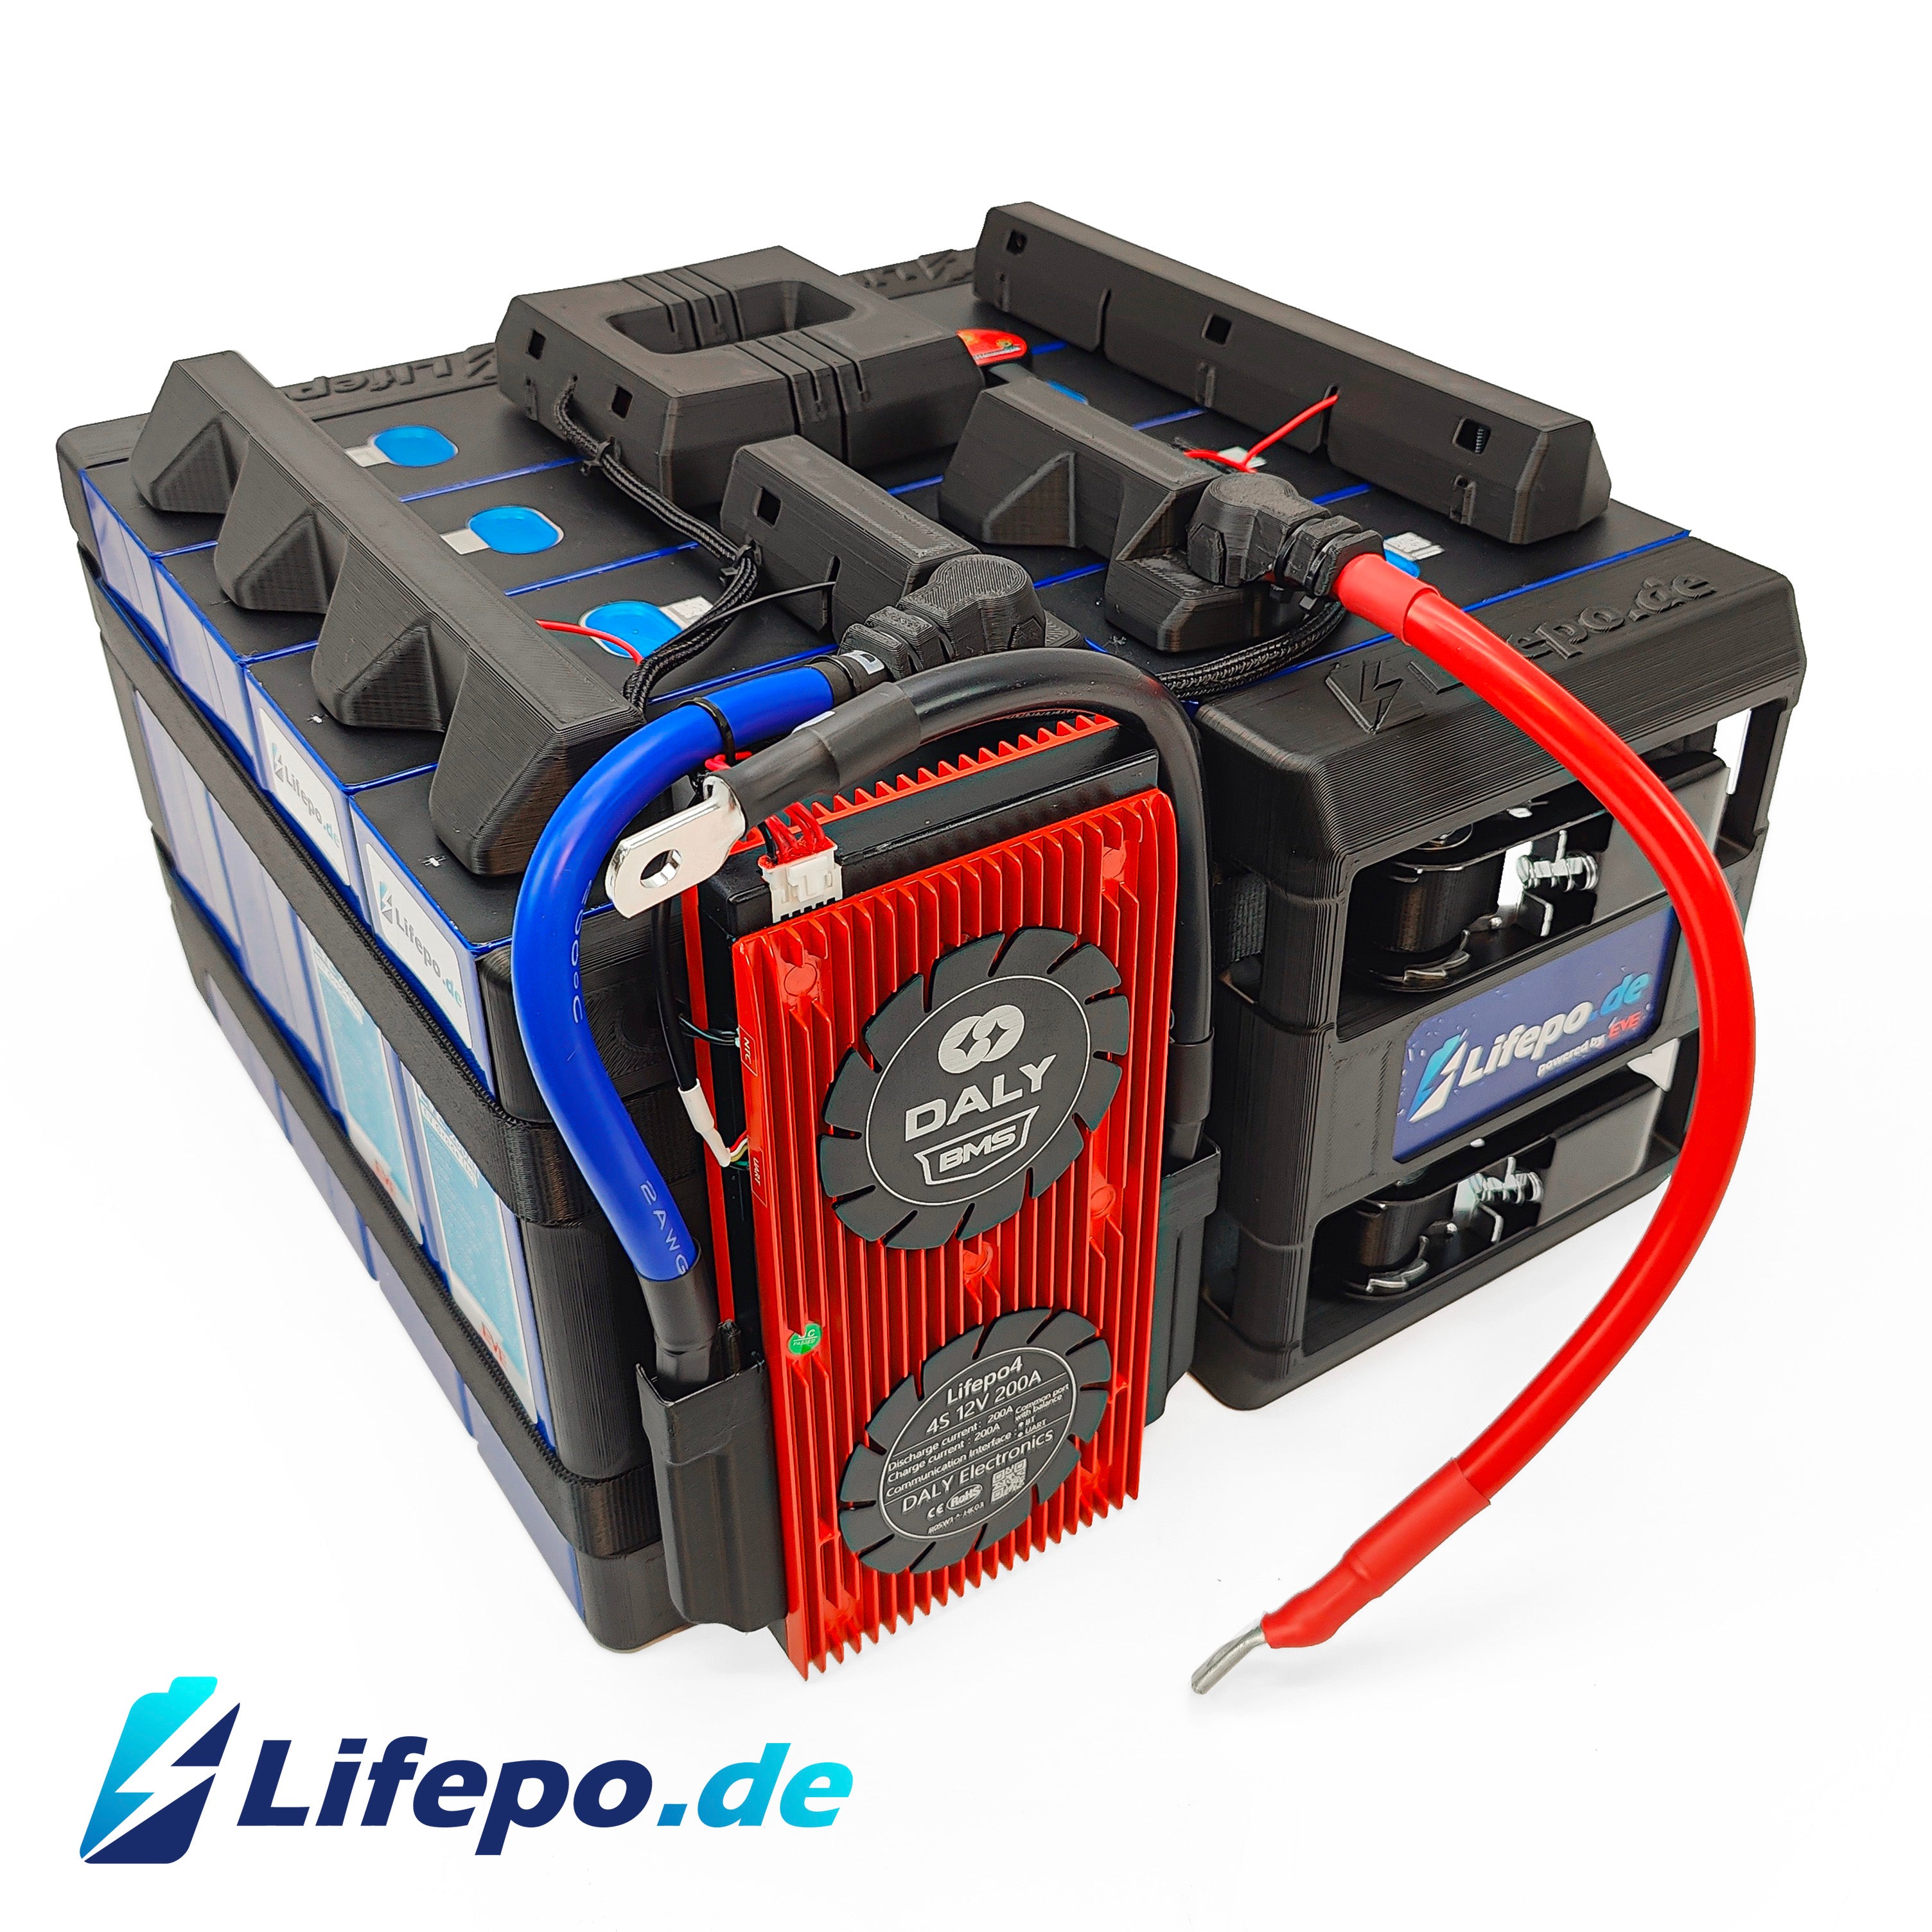 24v 560Ah Lifepo4 battery system with EVE Grade A+ 15.2kWh –